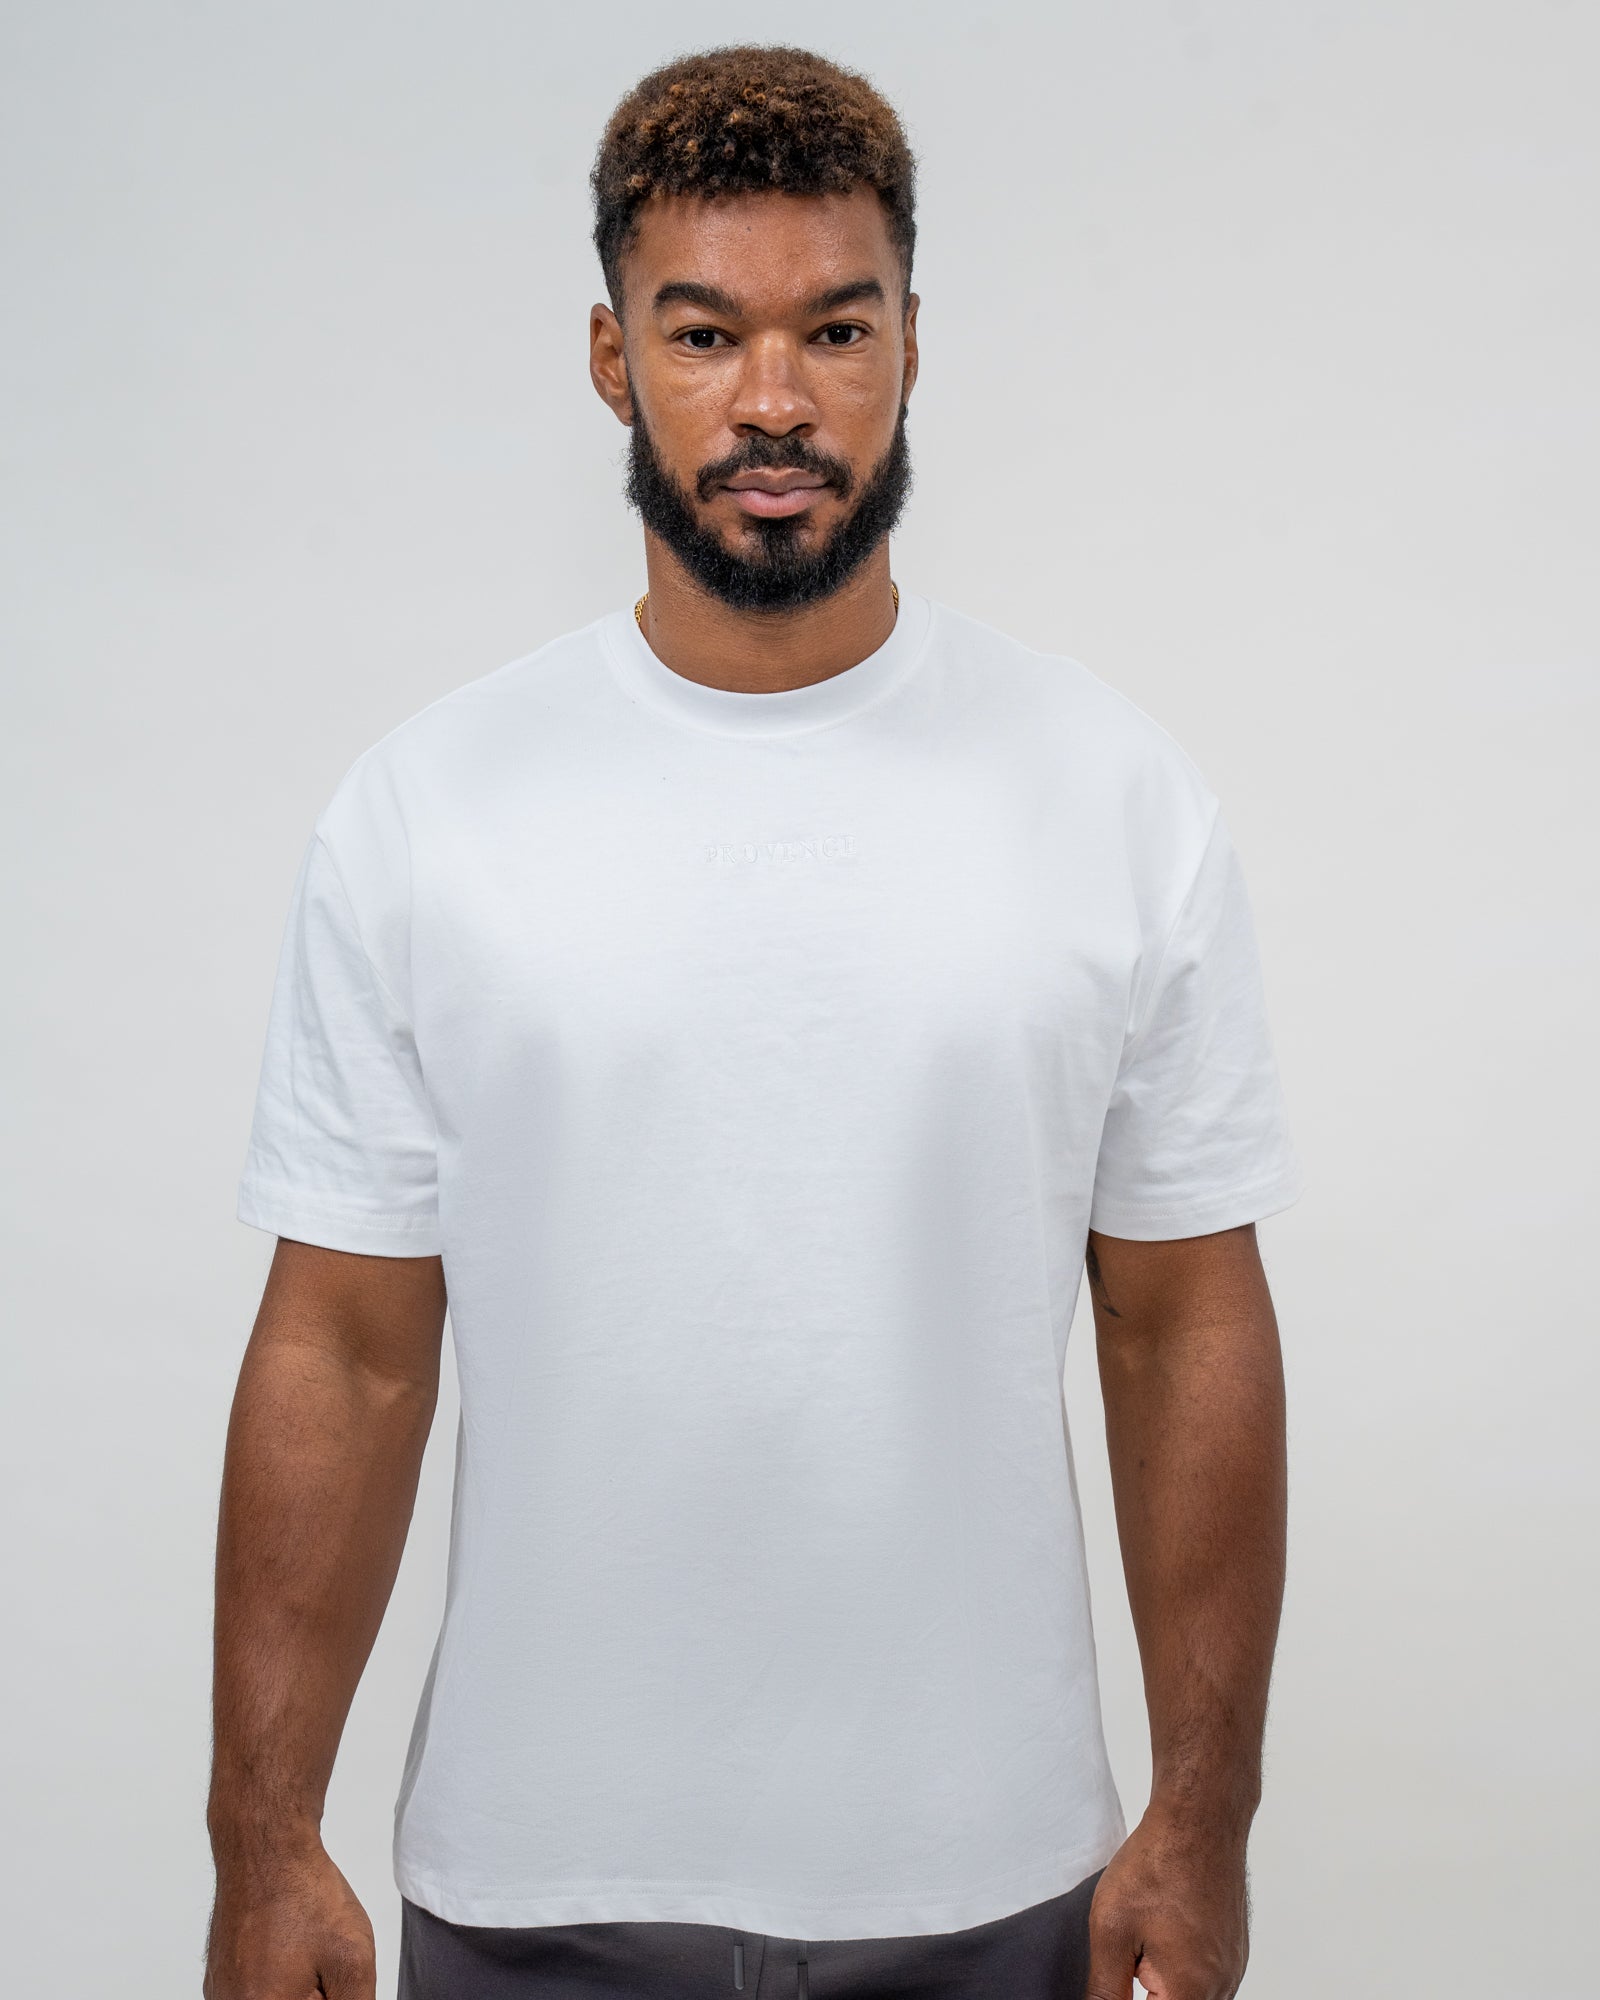 Mens Embroidery White T-Shirt